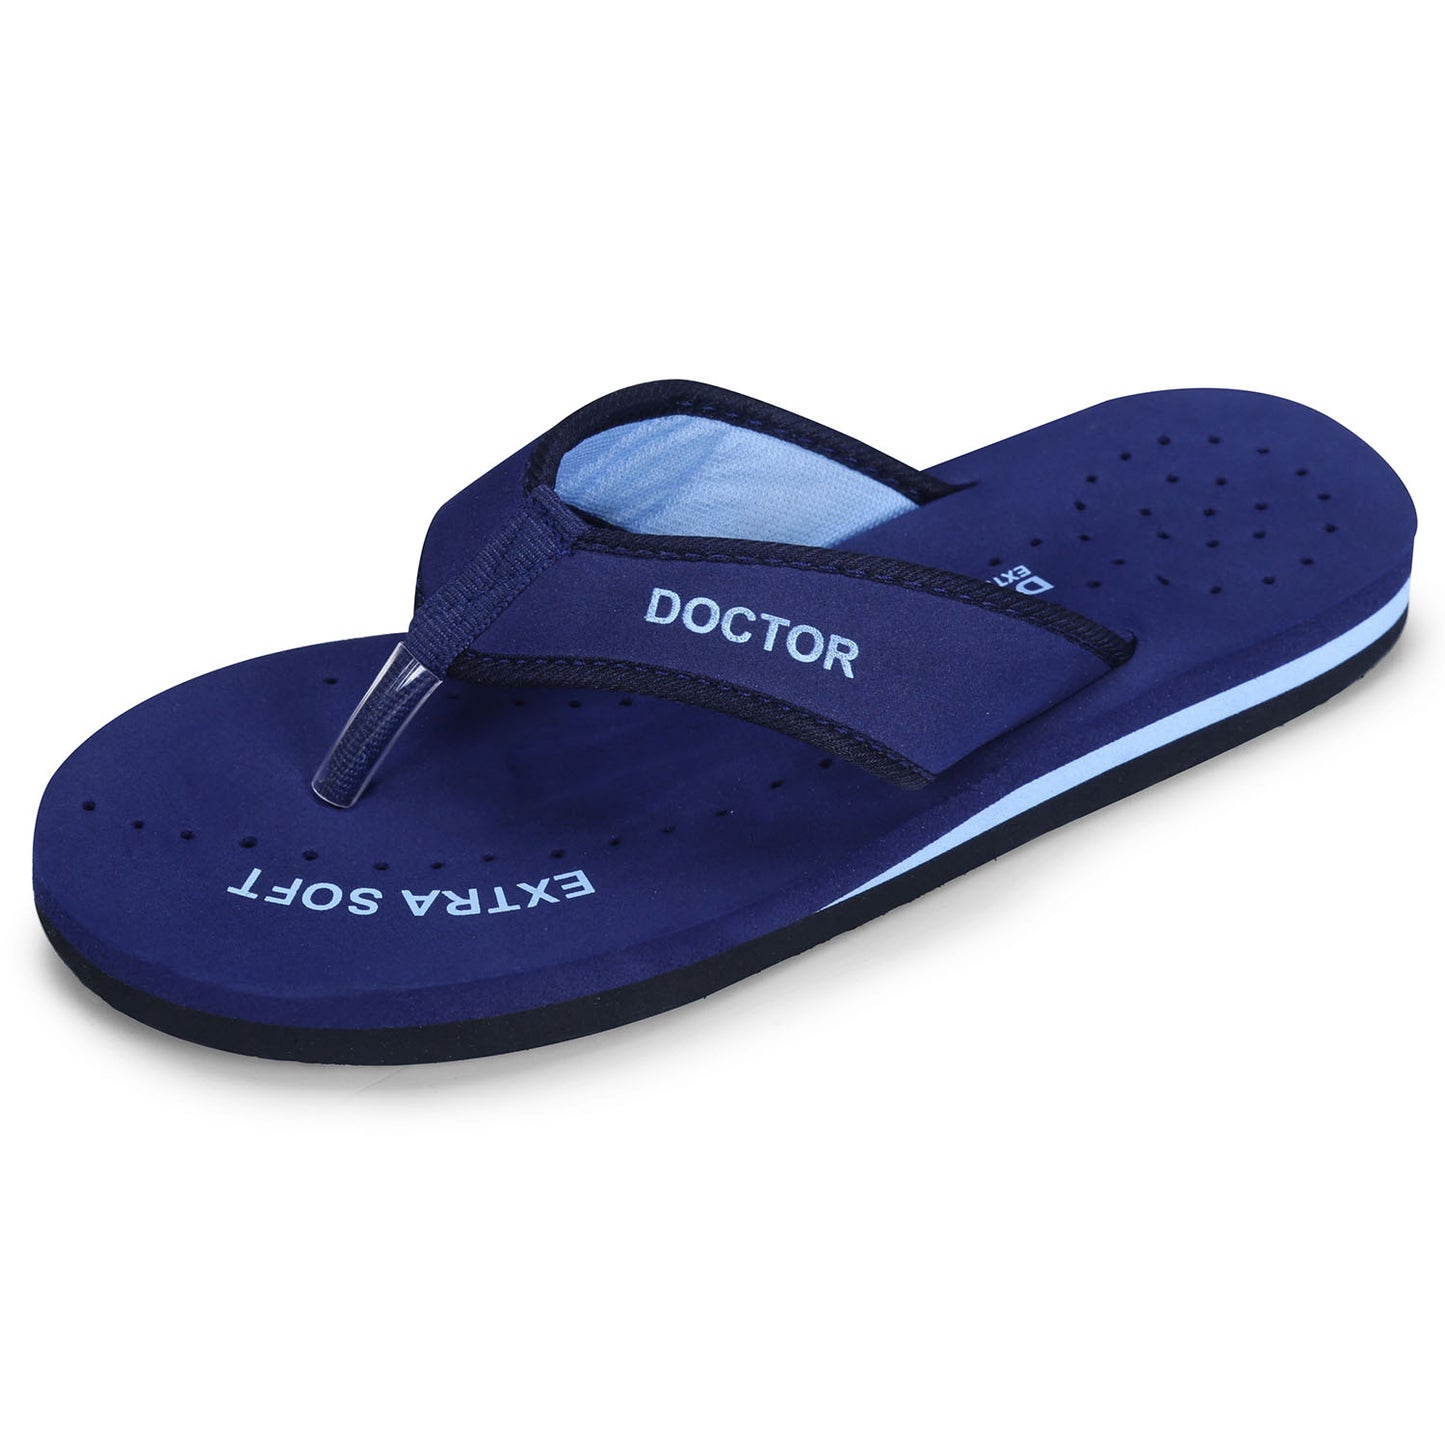 DOCTOR EXTRA SOFT D-22 Doctor Slippers for Women Orthopedic Diabetic Pregnancy Non Slip Lightweight Comfortable Flat Casual Stylish Dr Chappals & House Flip flops For Ladies & Girls